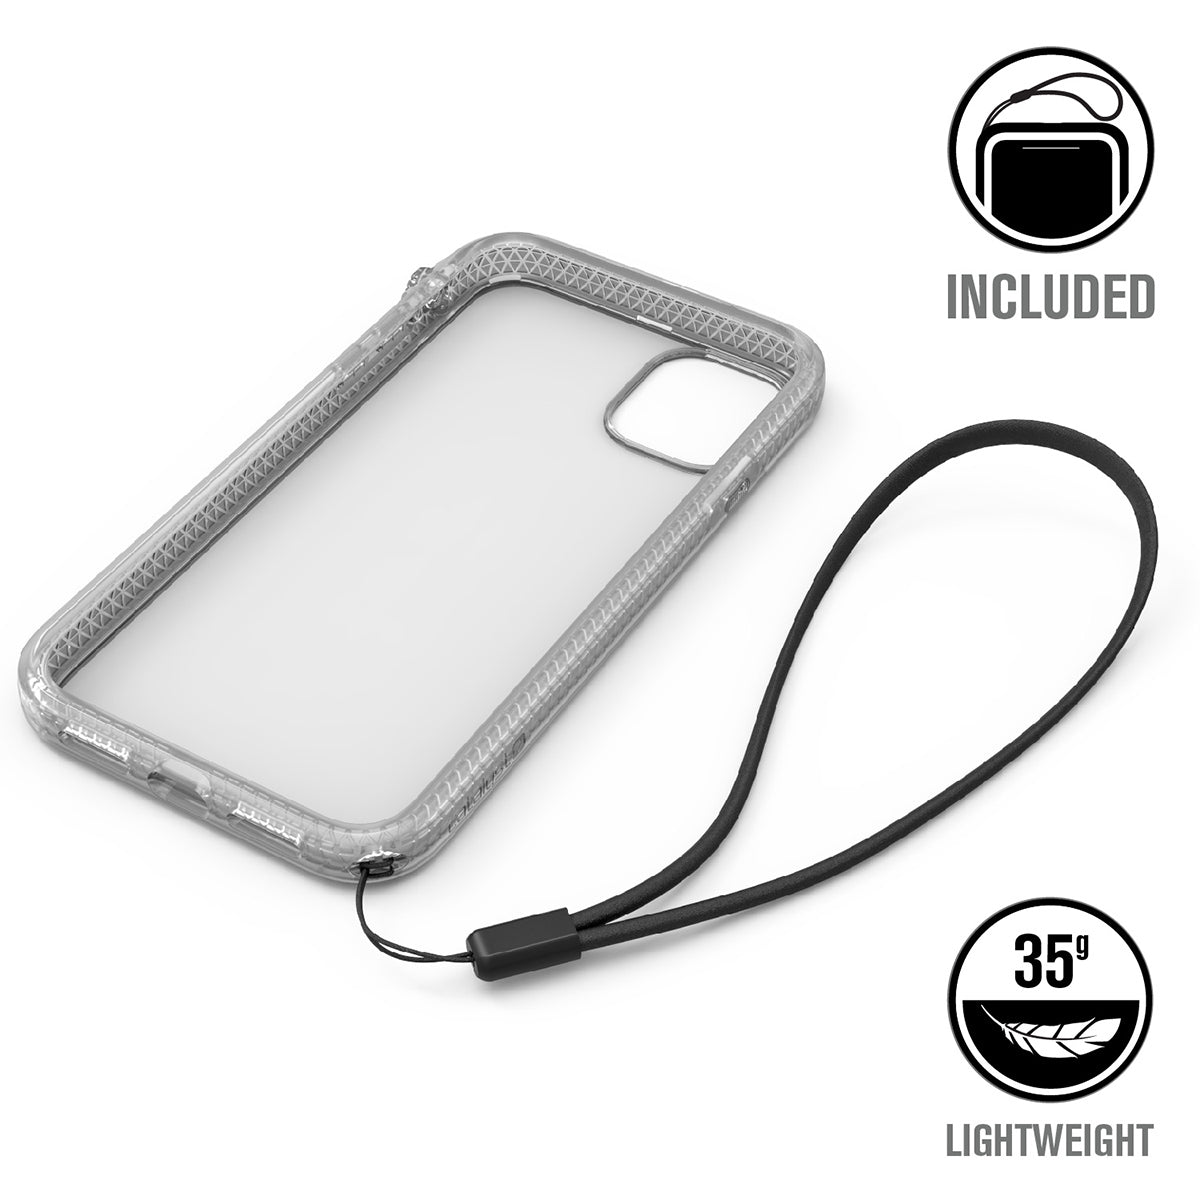 catalyst iPhone 11 series impact protection case empty clear case for iPhone 11 with a lanyard text reads included 35g lightweight